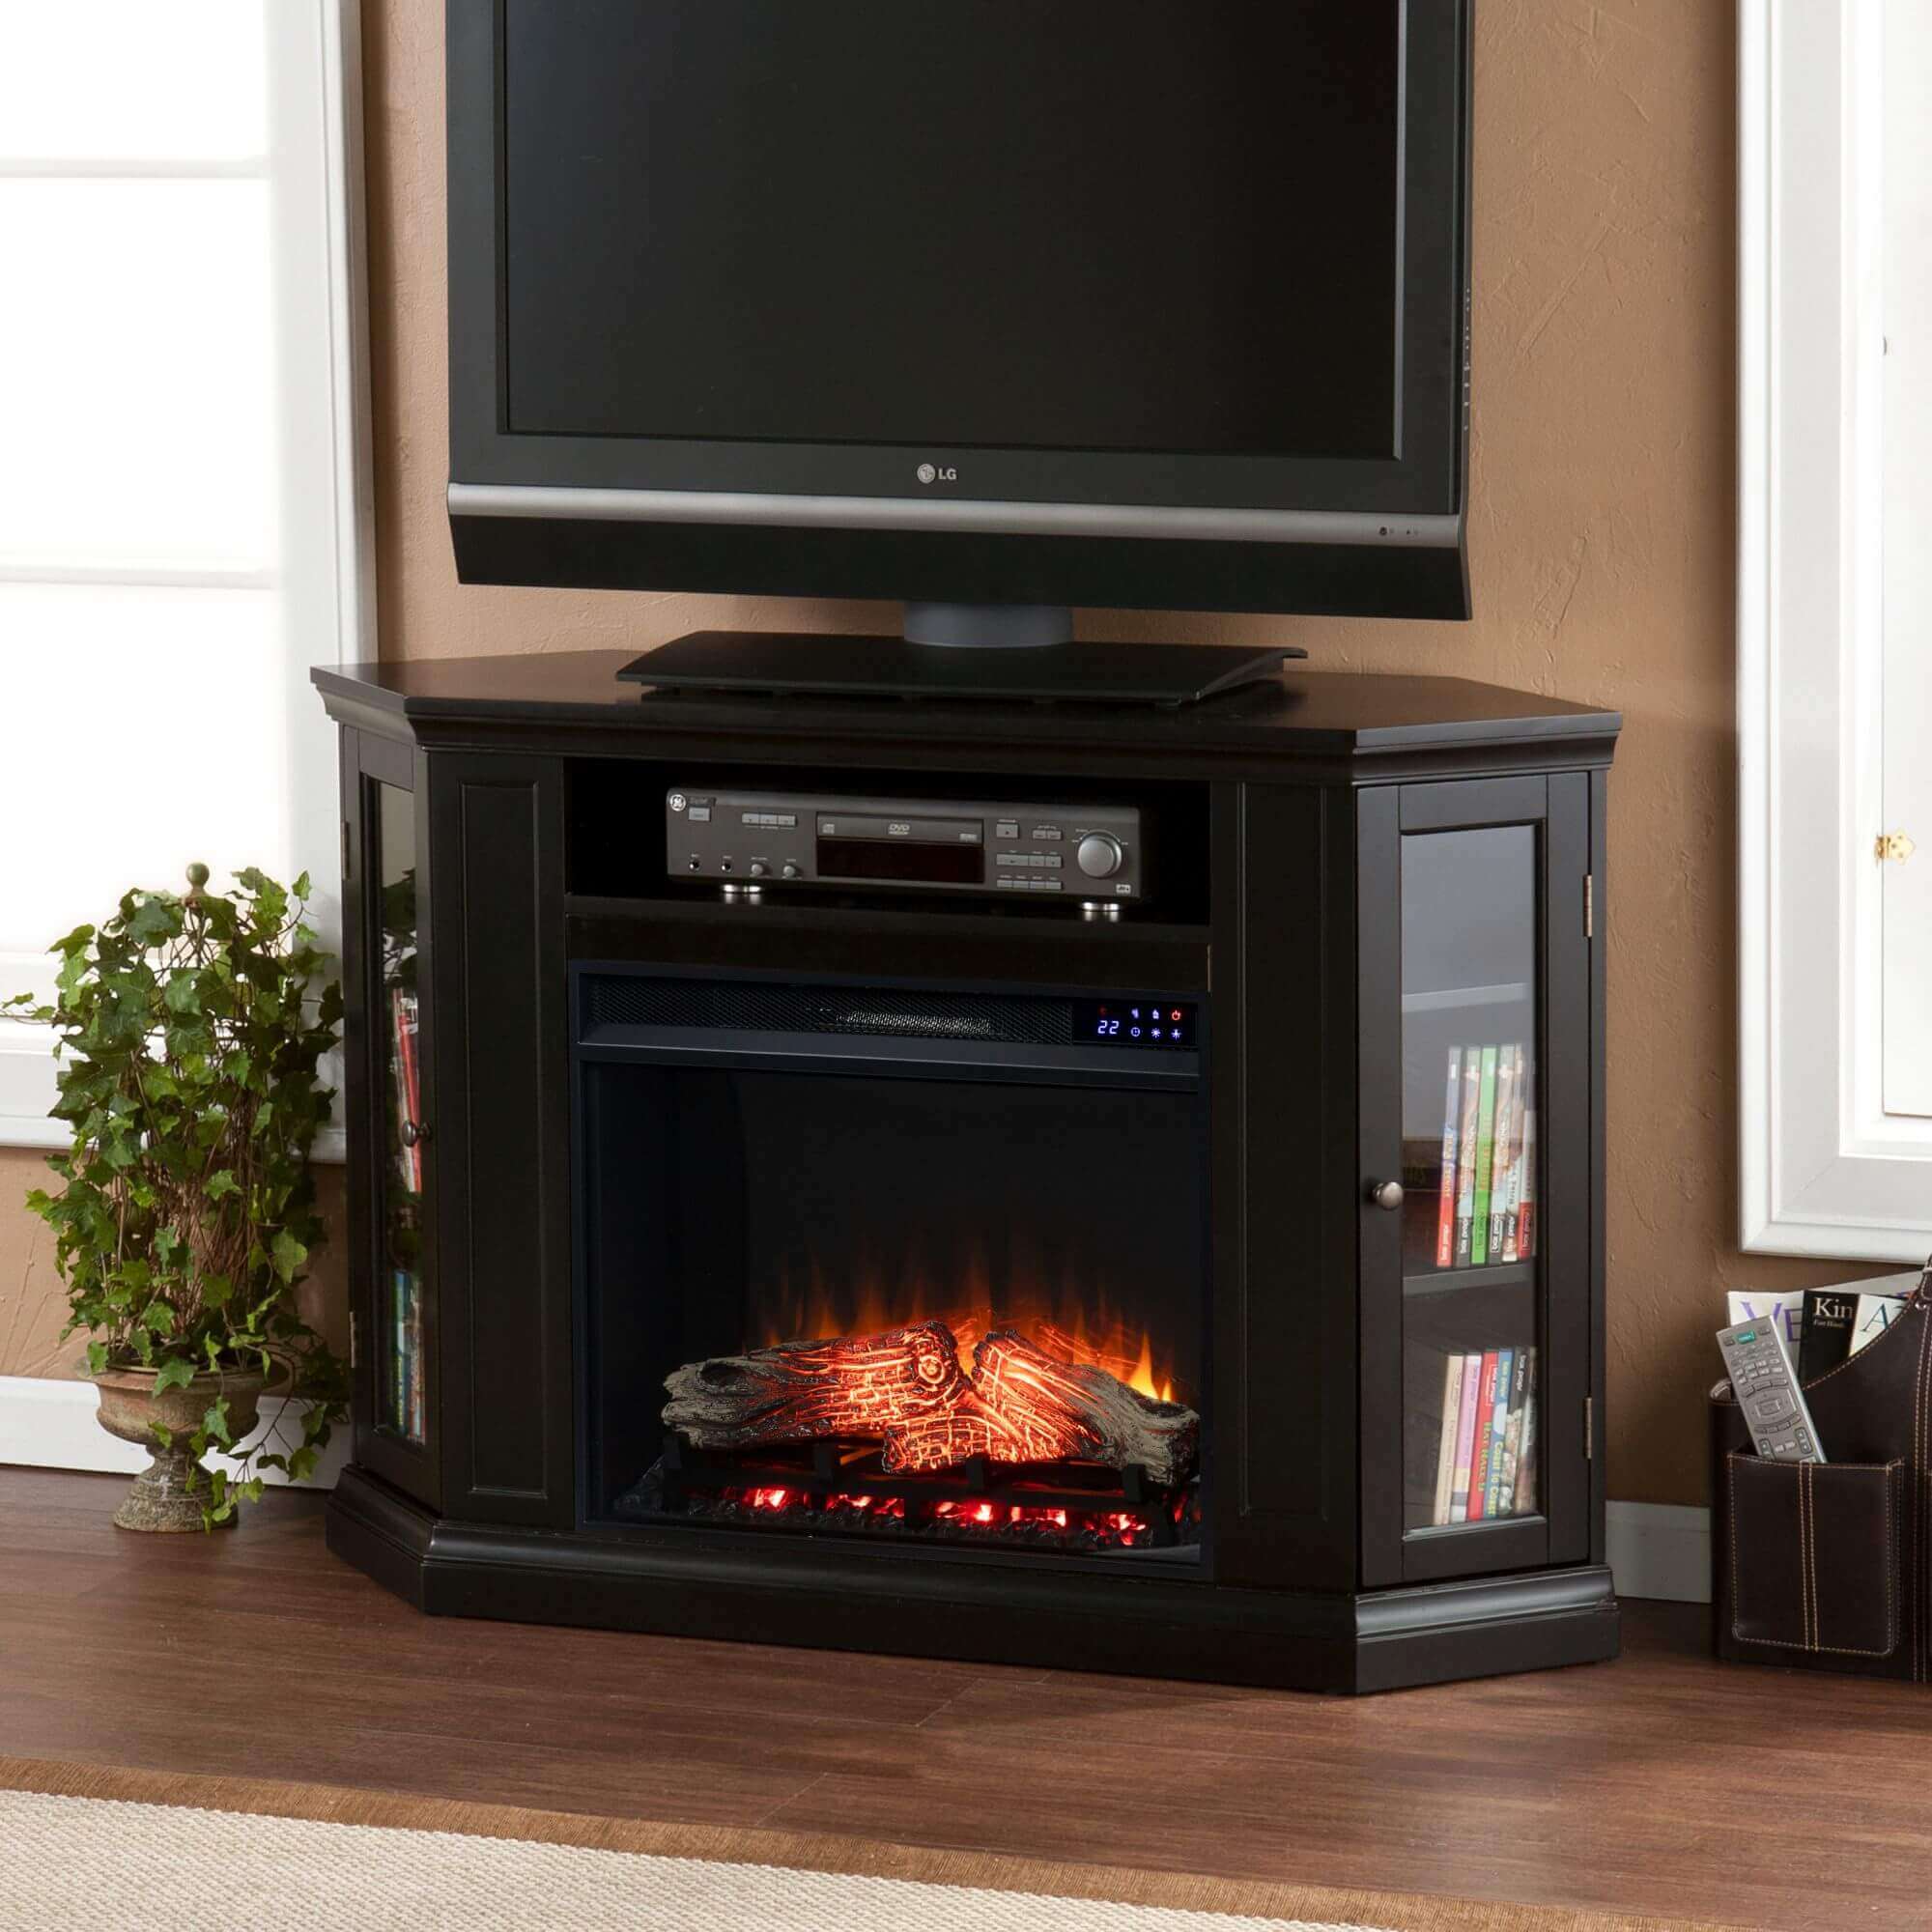 Claremont Electric Corner Touch Screen Fireplace with Storage - Black